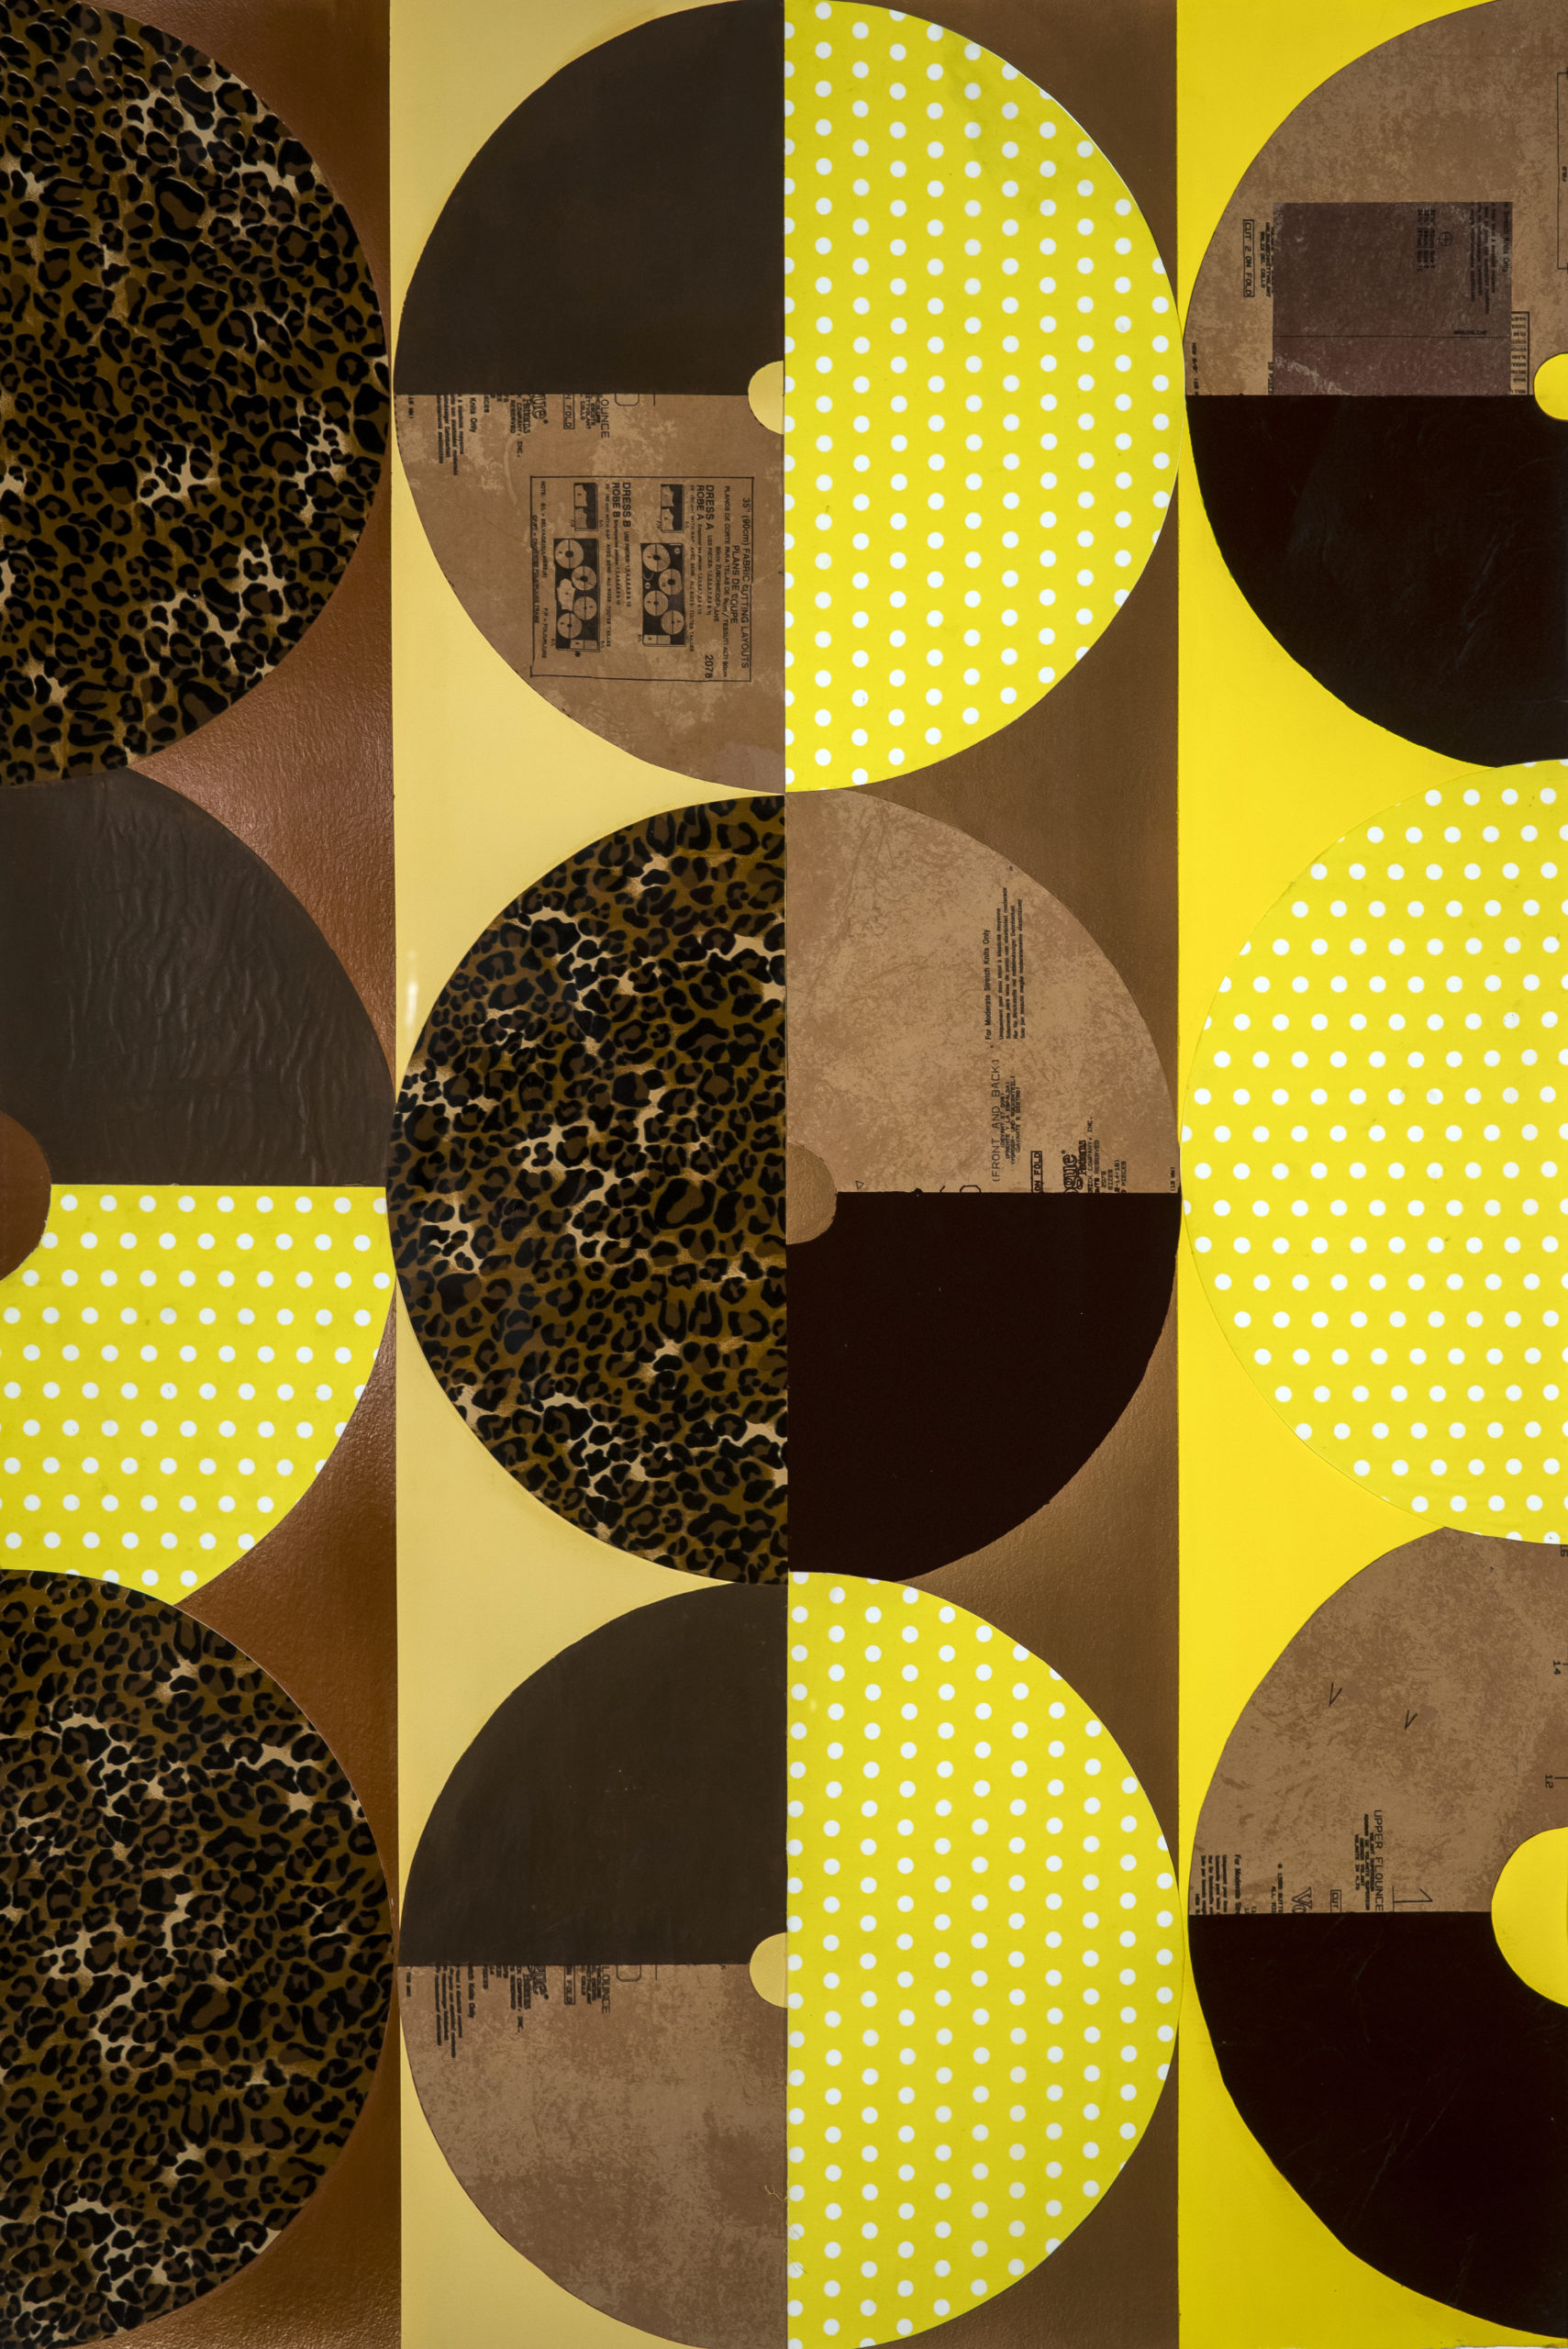 Image of different a circle pattern collage; inside are repeated brown, polka-dotted yellows, and leopard print